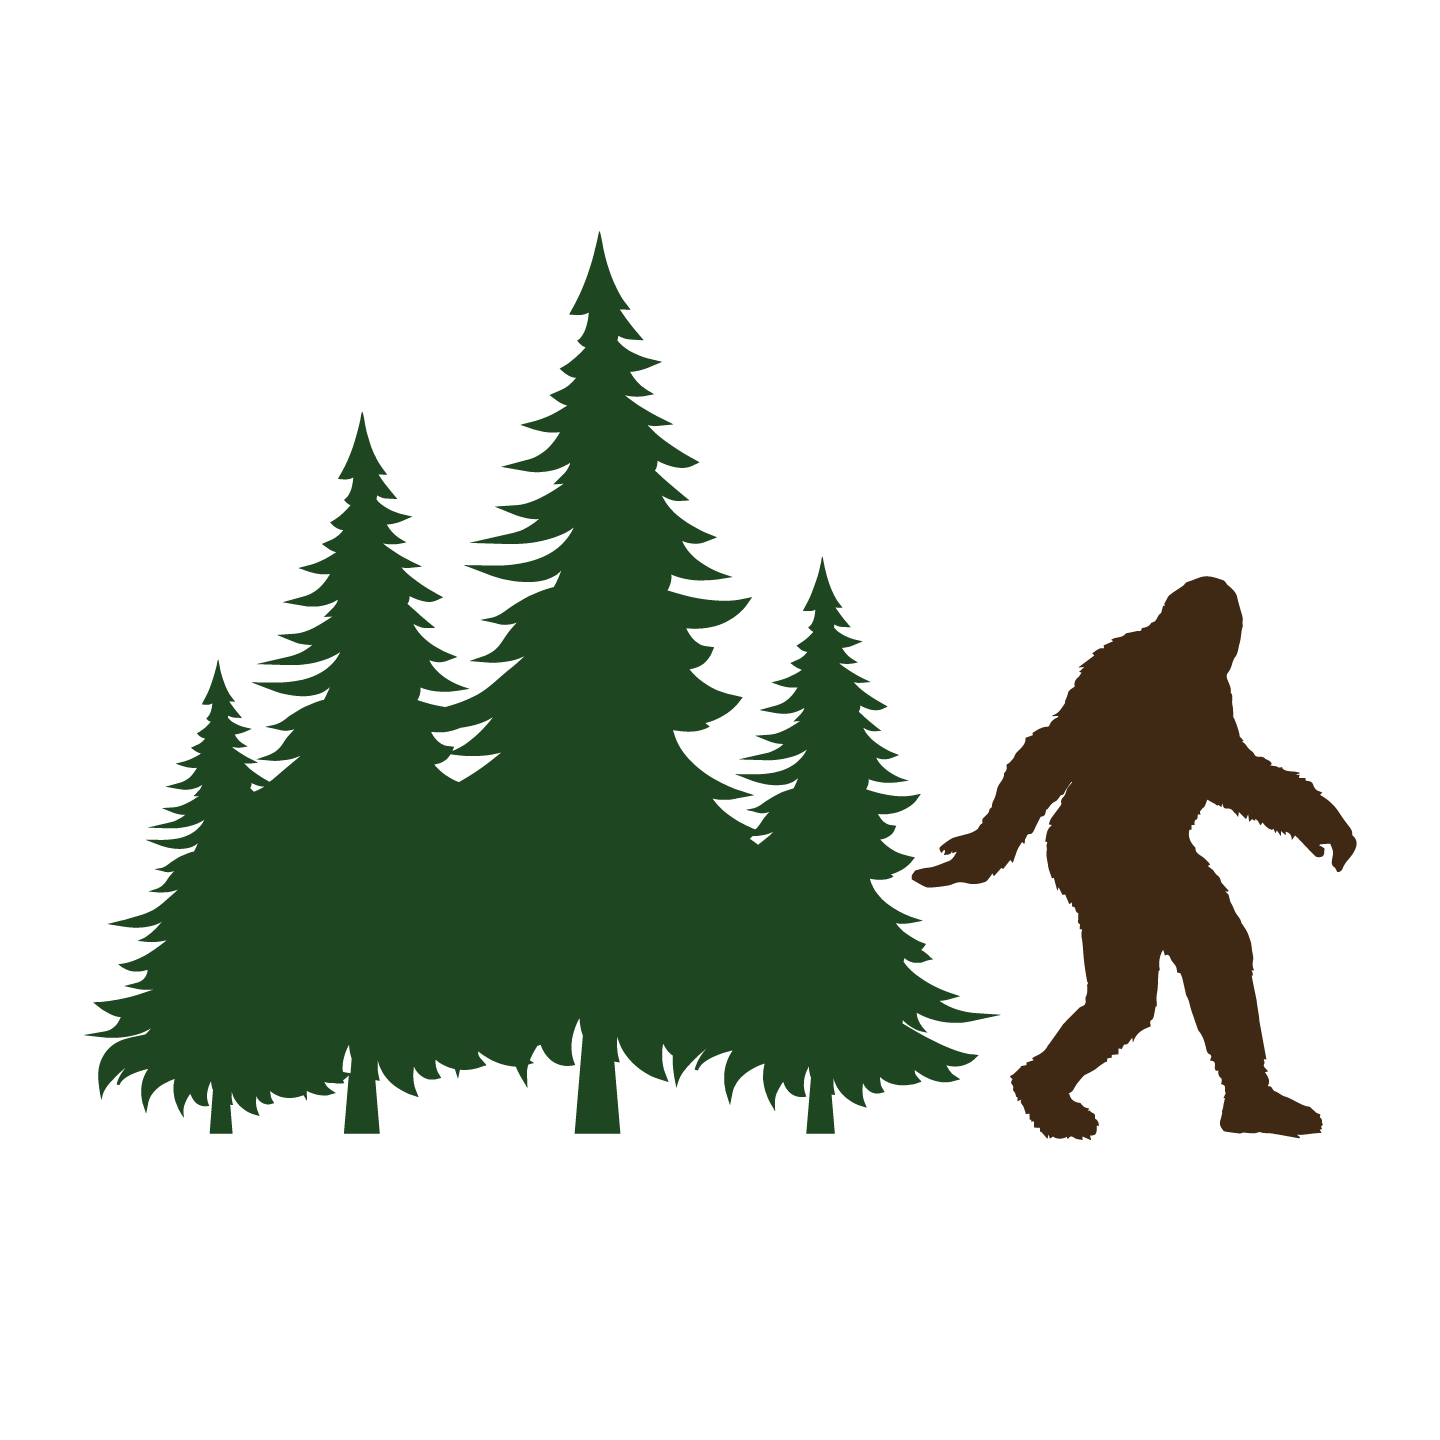 Image with green trees and bigfoot.